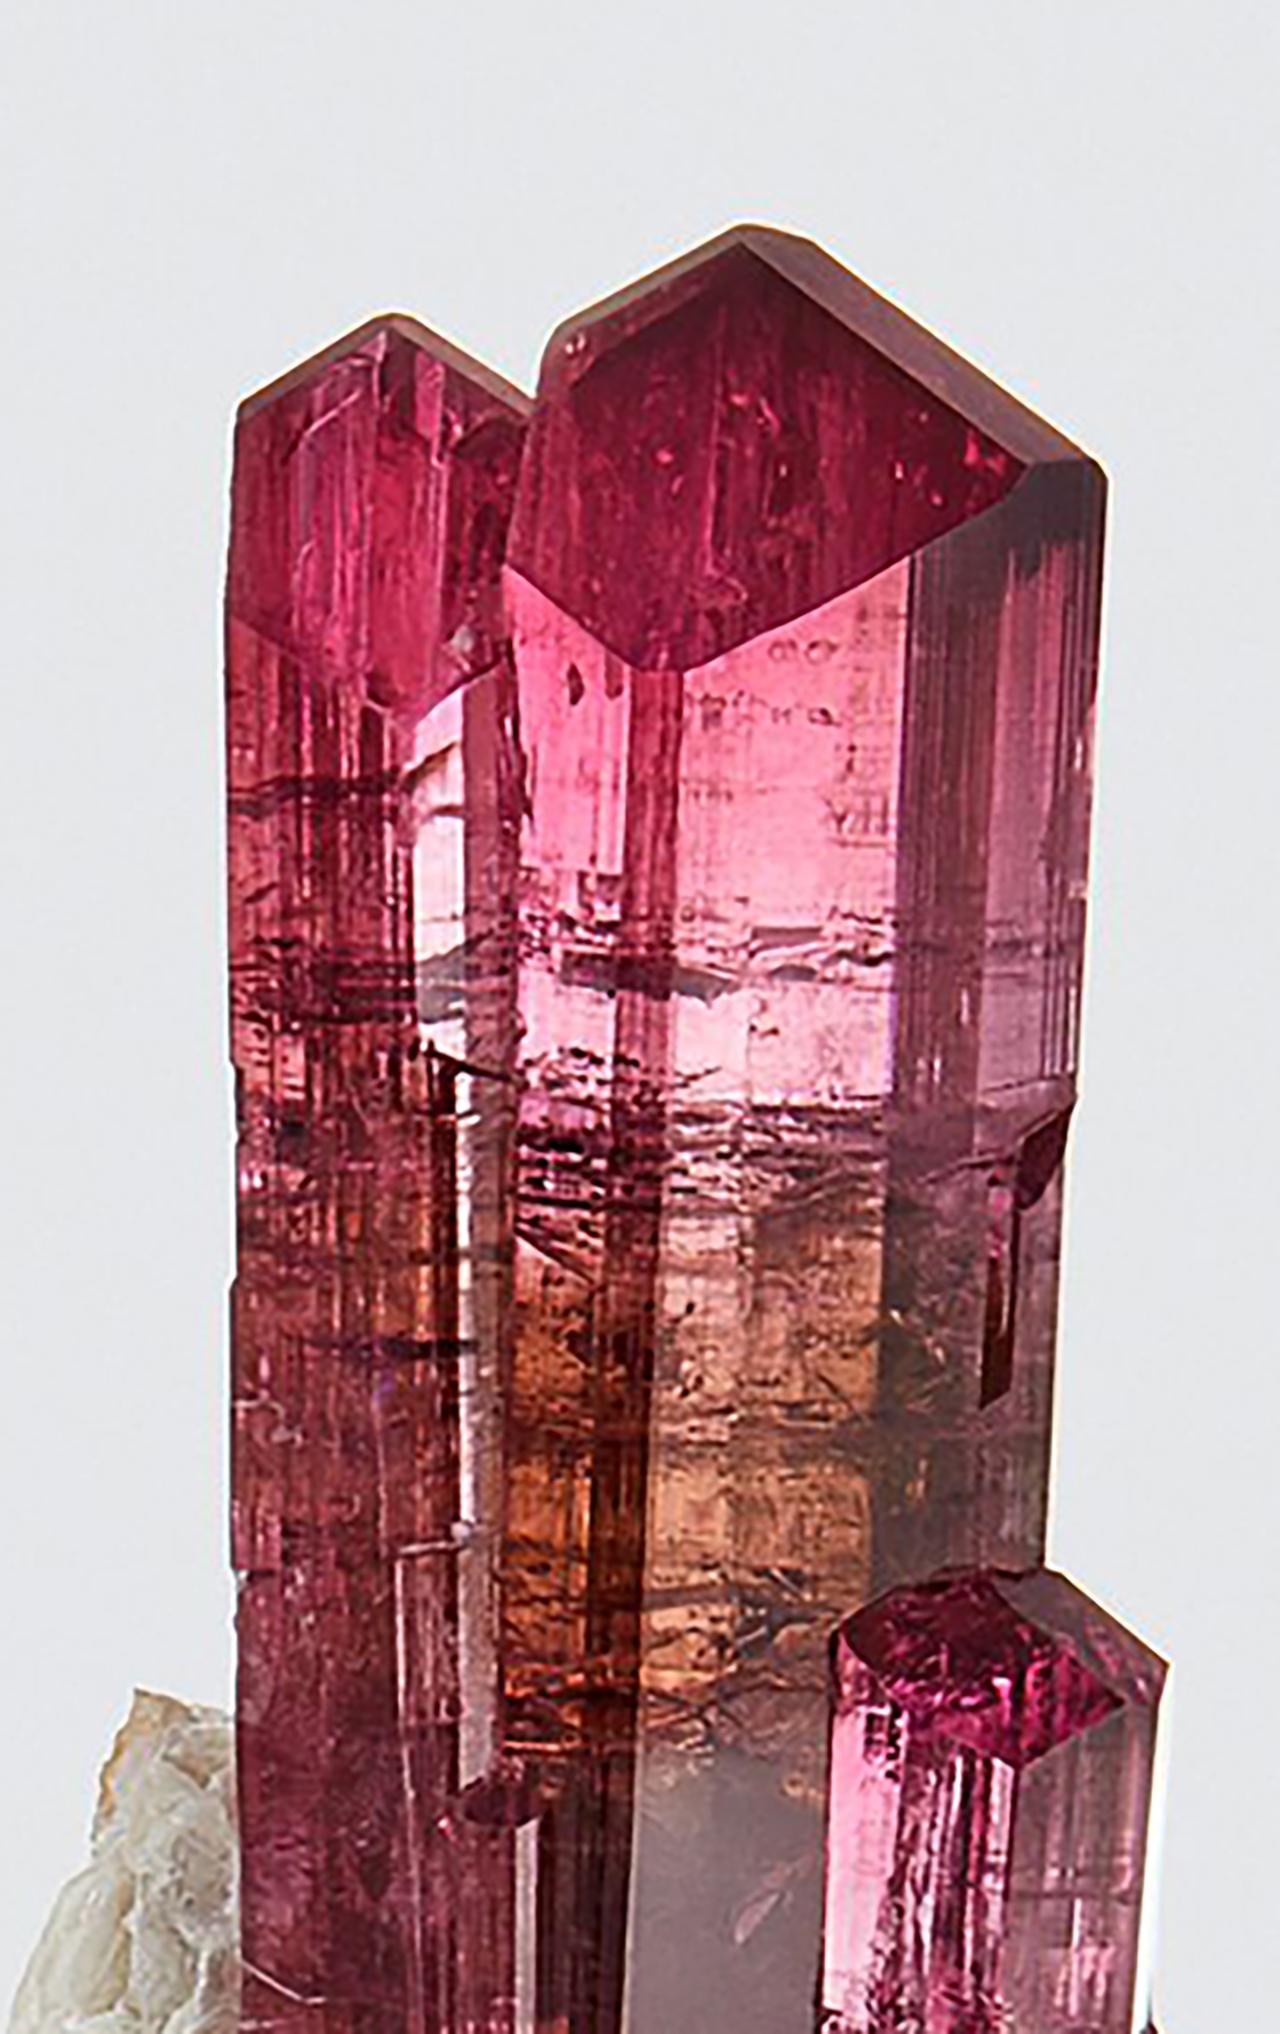 Rubellite Tourmaline on Feldspar, Malkhan Pegmatite Field, Krasnyi Chikoy, Zabaykalsky Krai, Russia
Measures: 8 cm tall x 8 cm wide

All rubellite tourmaline is compared to the famous Jonas Mine in Brazil, which for the past 50 years has held the